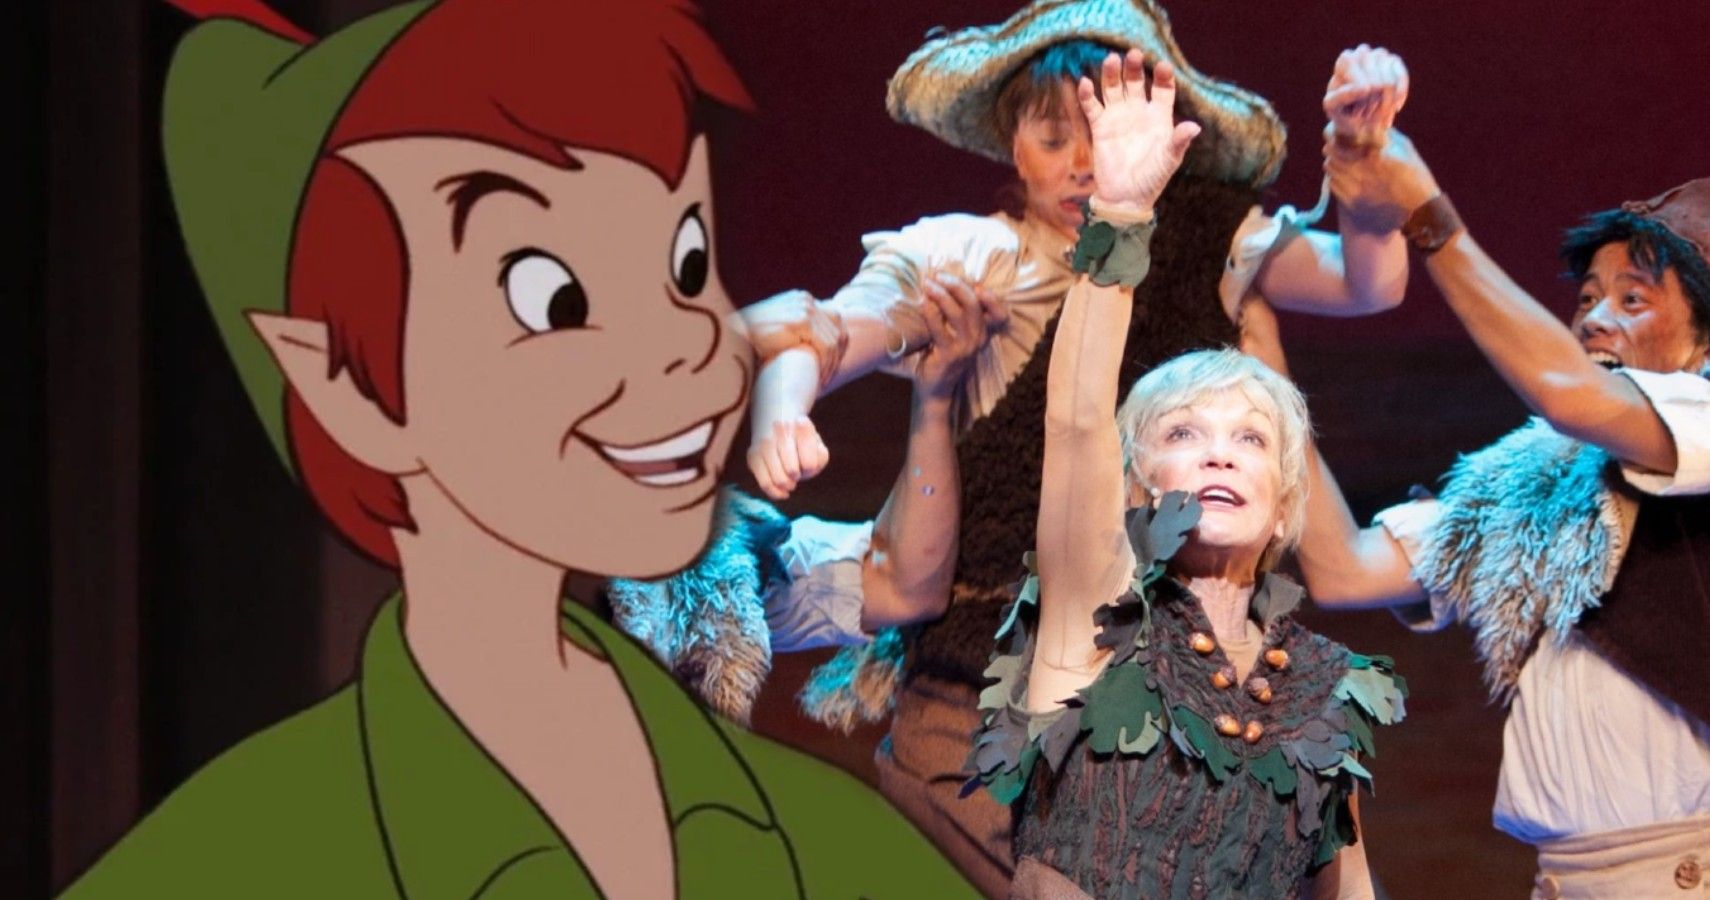 Peter Pan: 5 Things Disney Took From The Play (& 5 They Added Themselves)